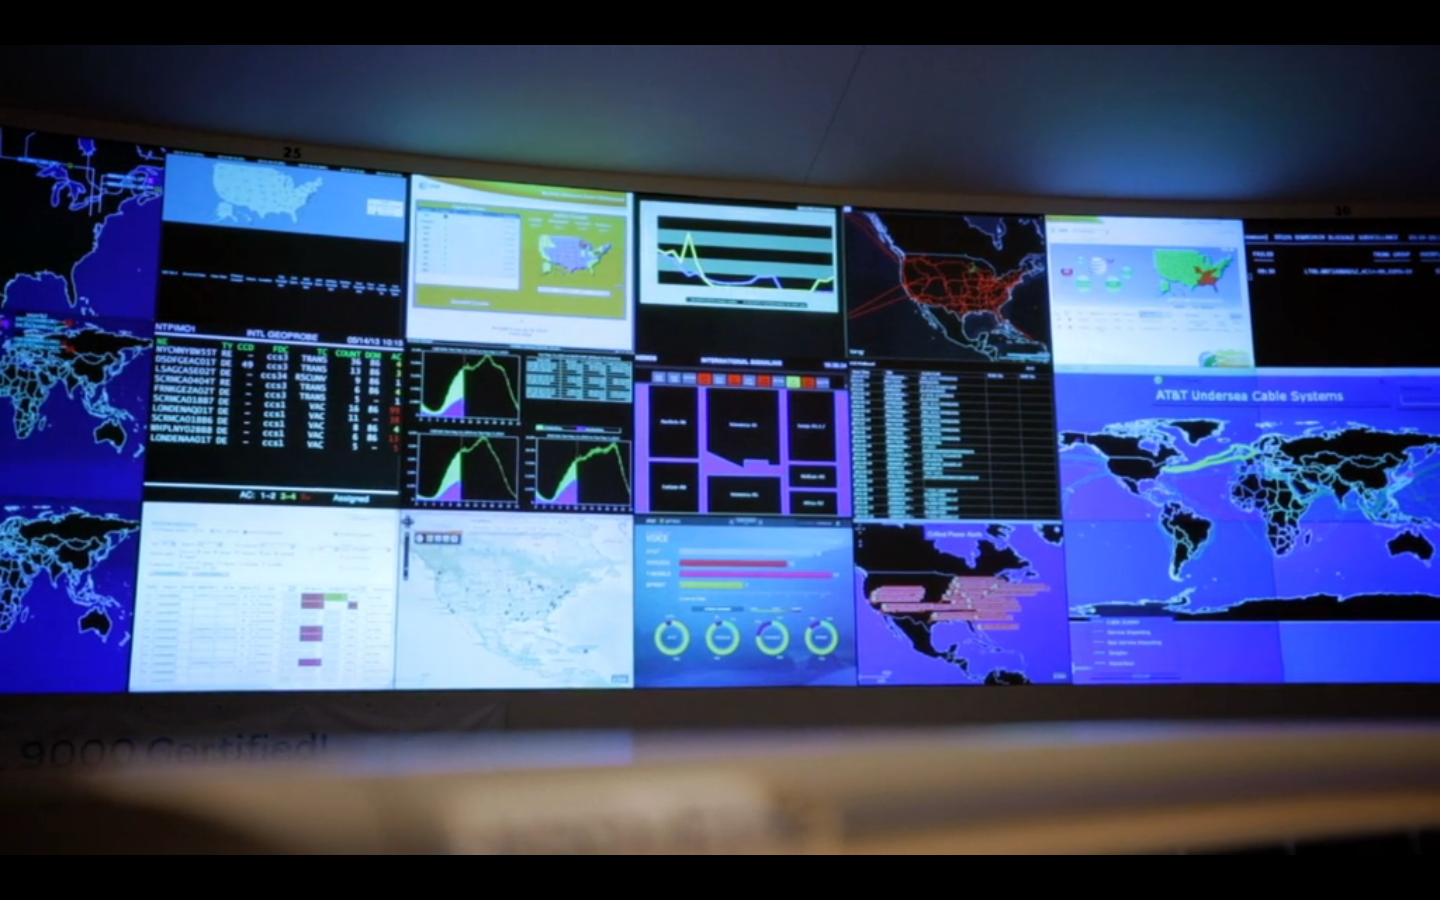 View on the large shared dashboard at AT&T (in the video at 1:20)